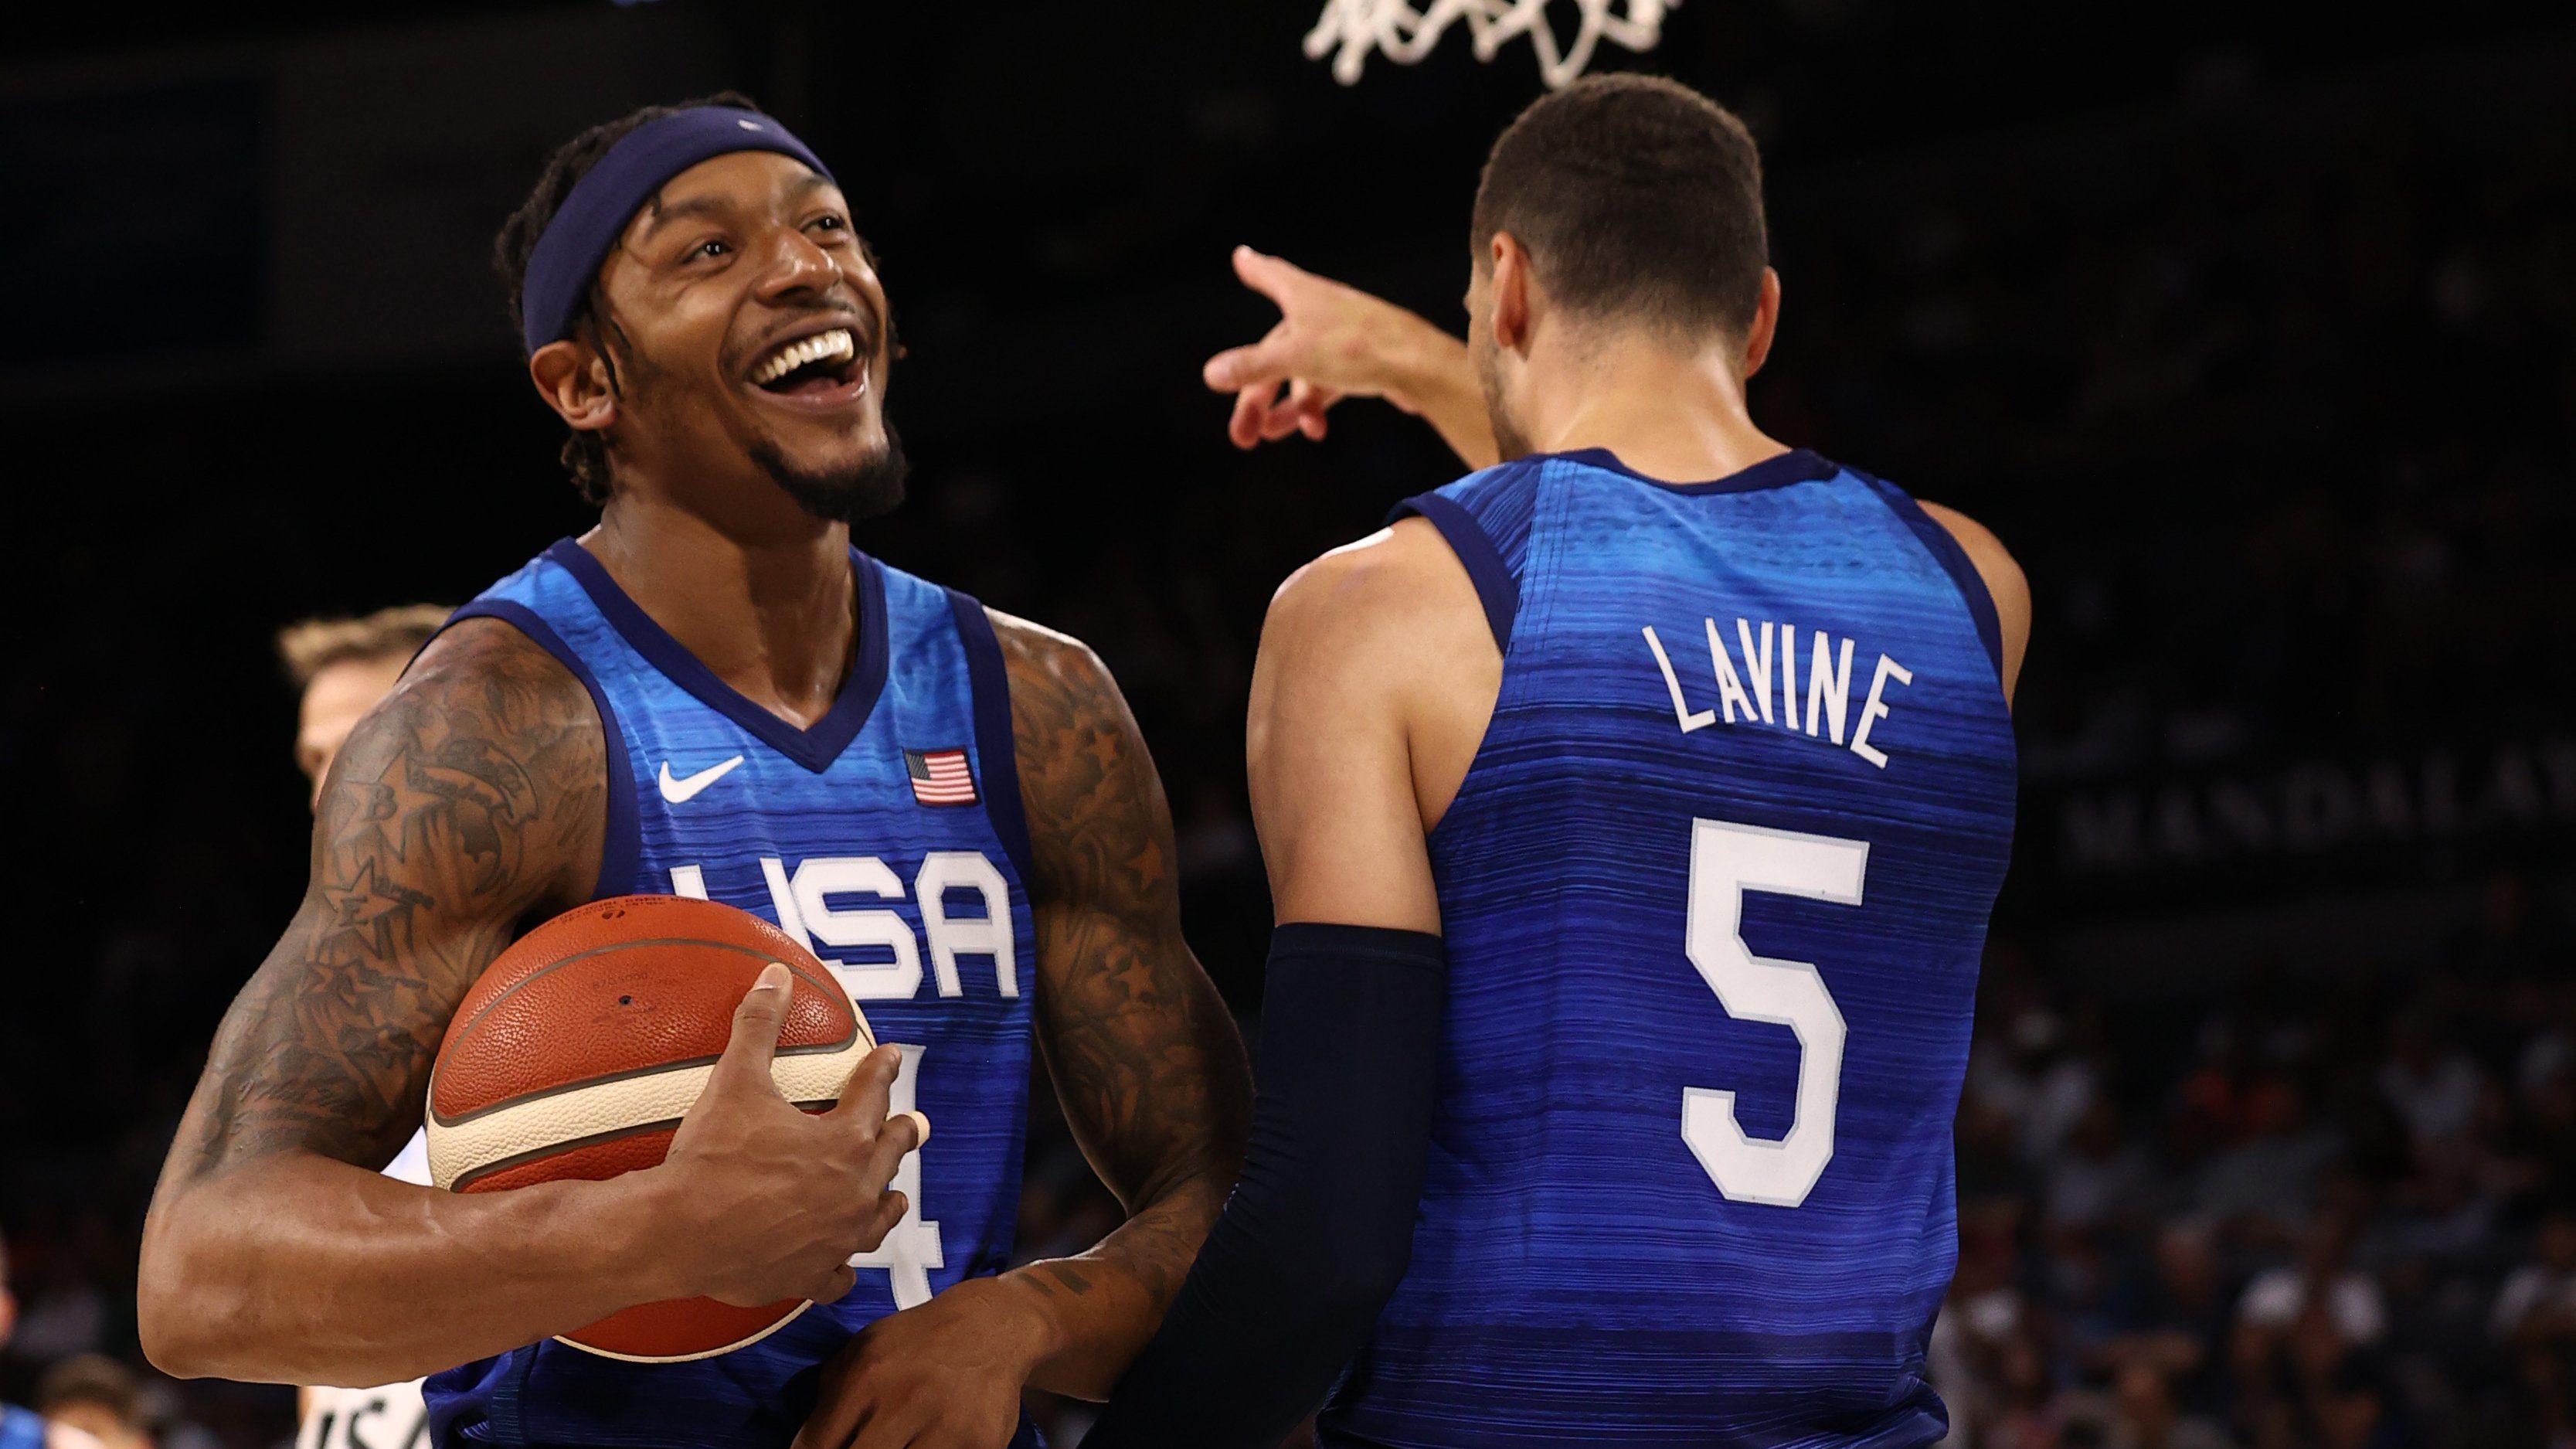 Bradley Beal out of Olympics; USA-Australia exhibition canceled